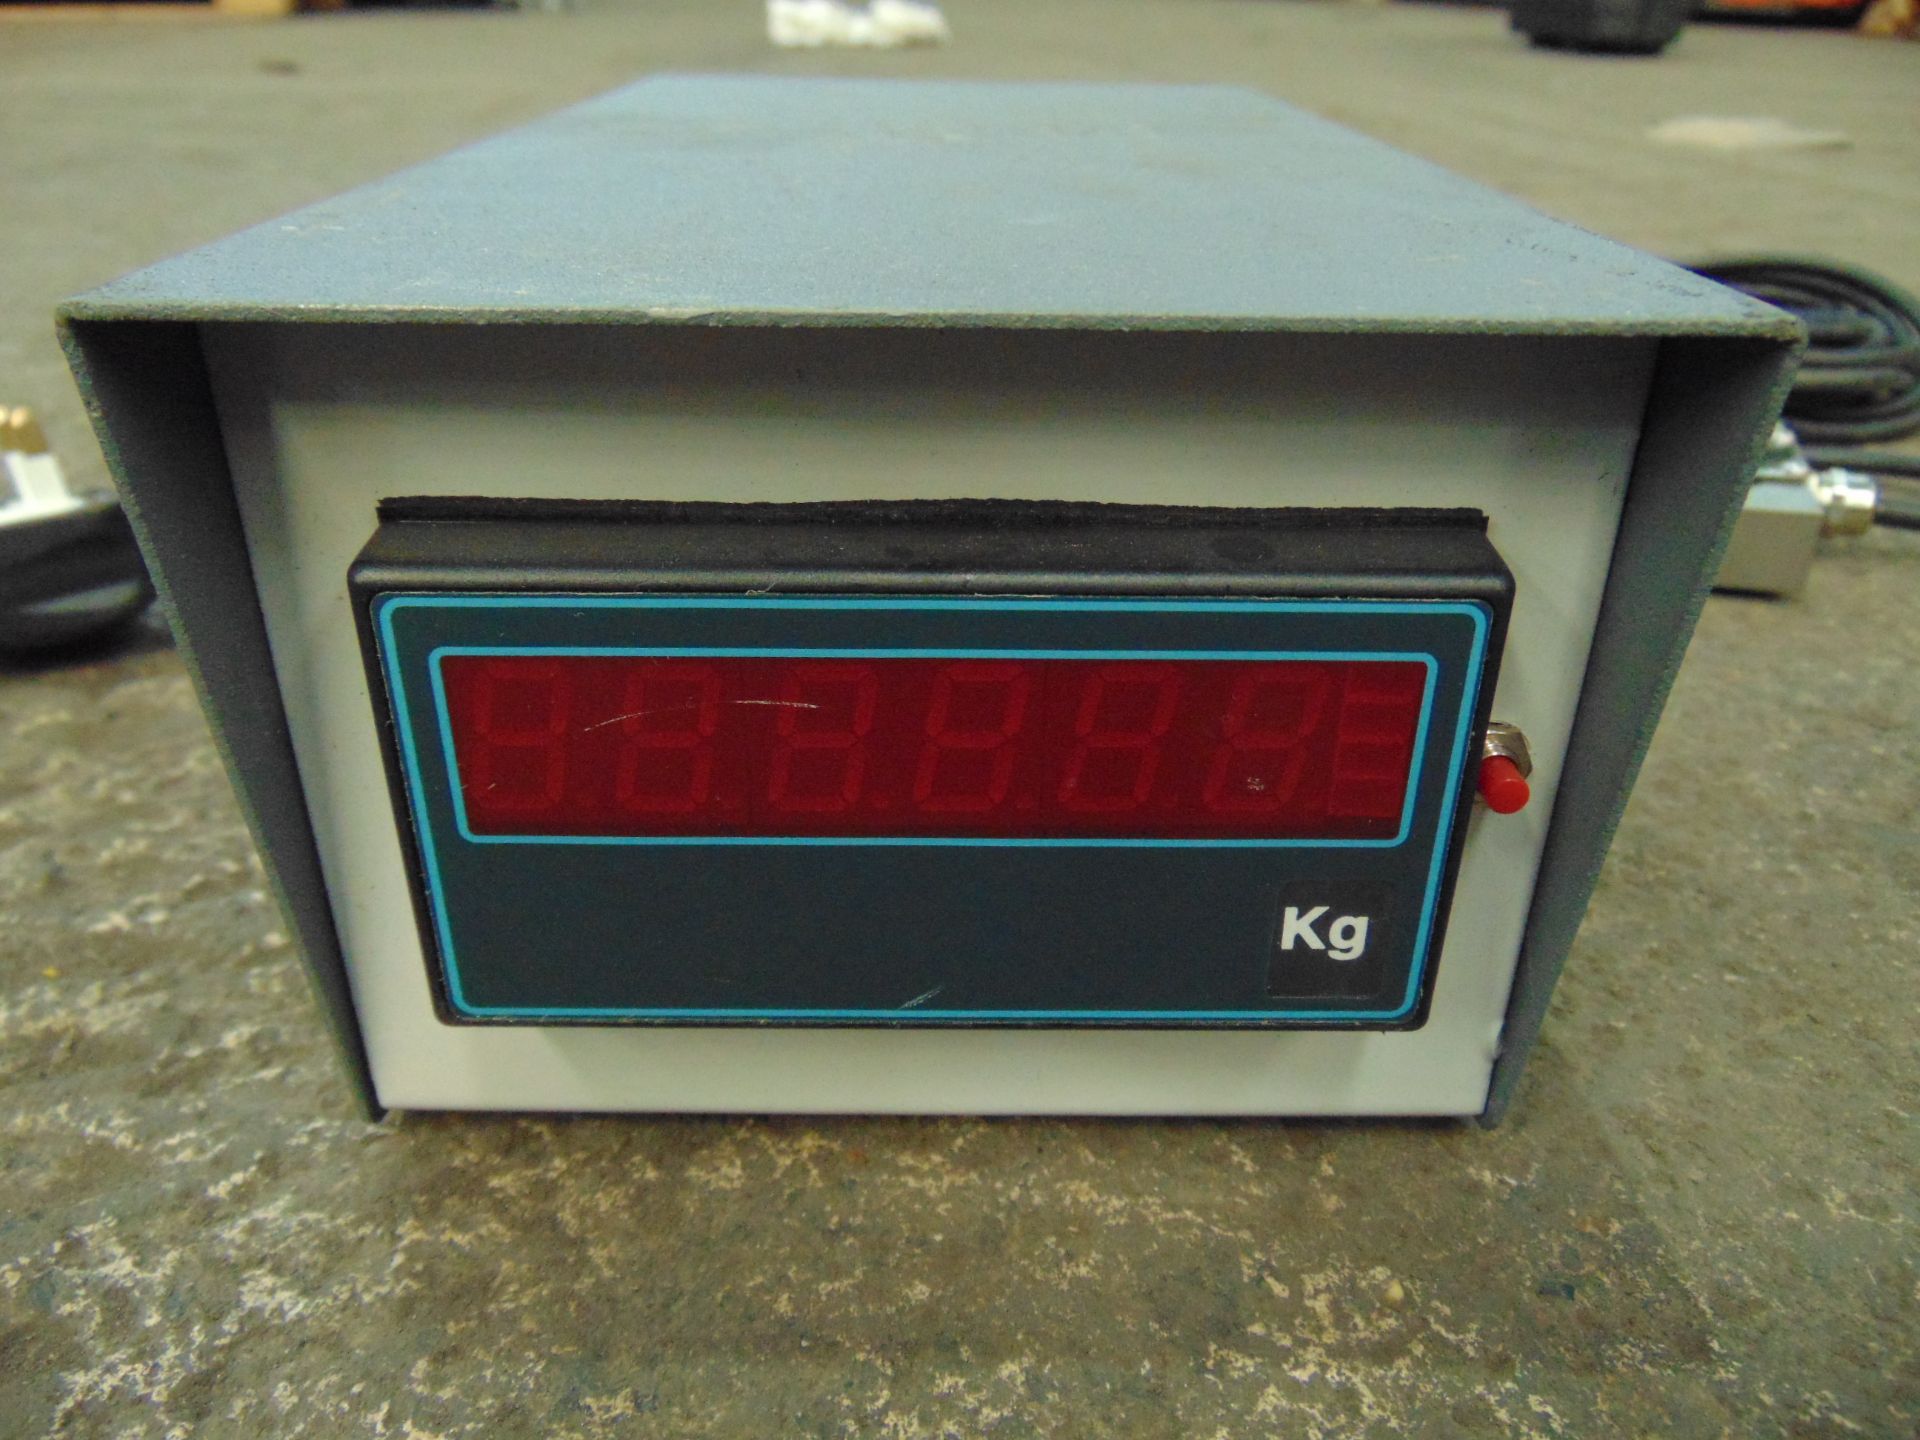 Electronic Digital Weighing Scales - Image 2 of 8